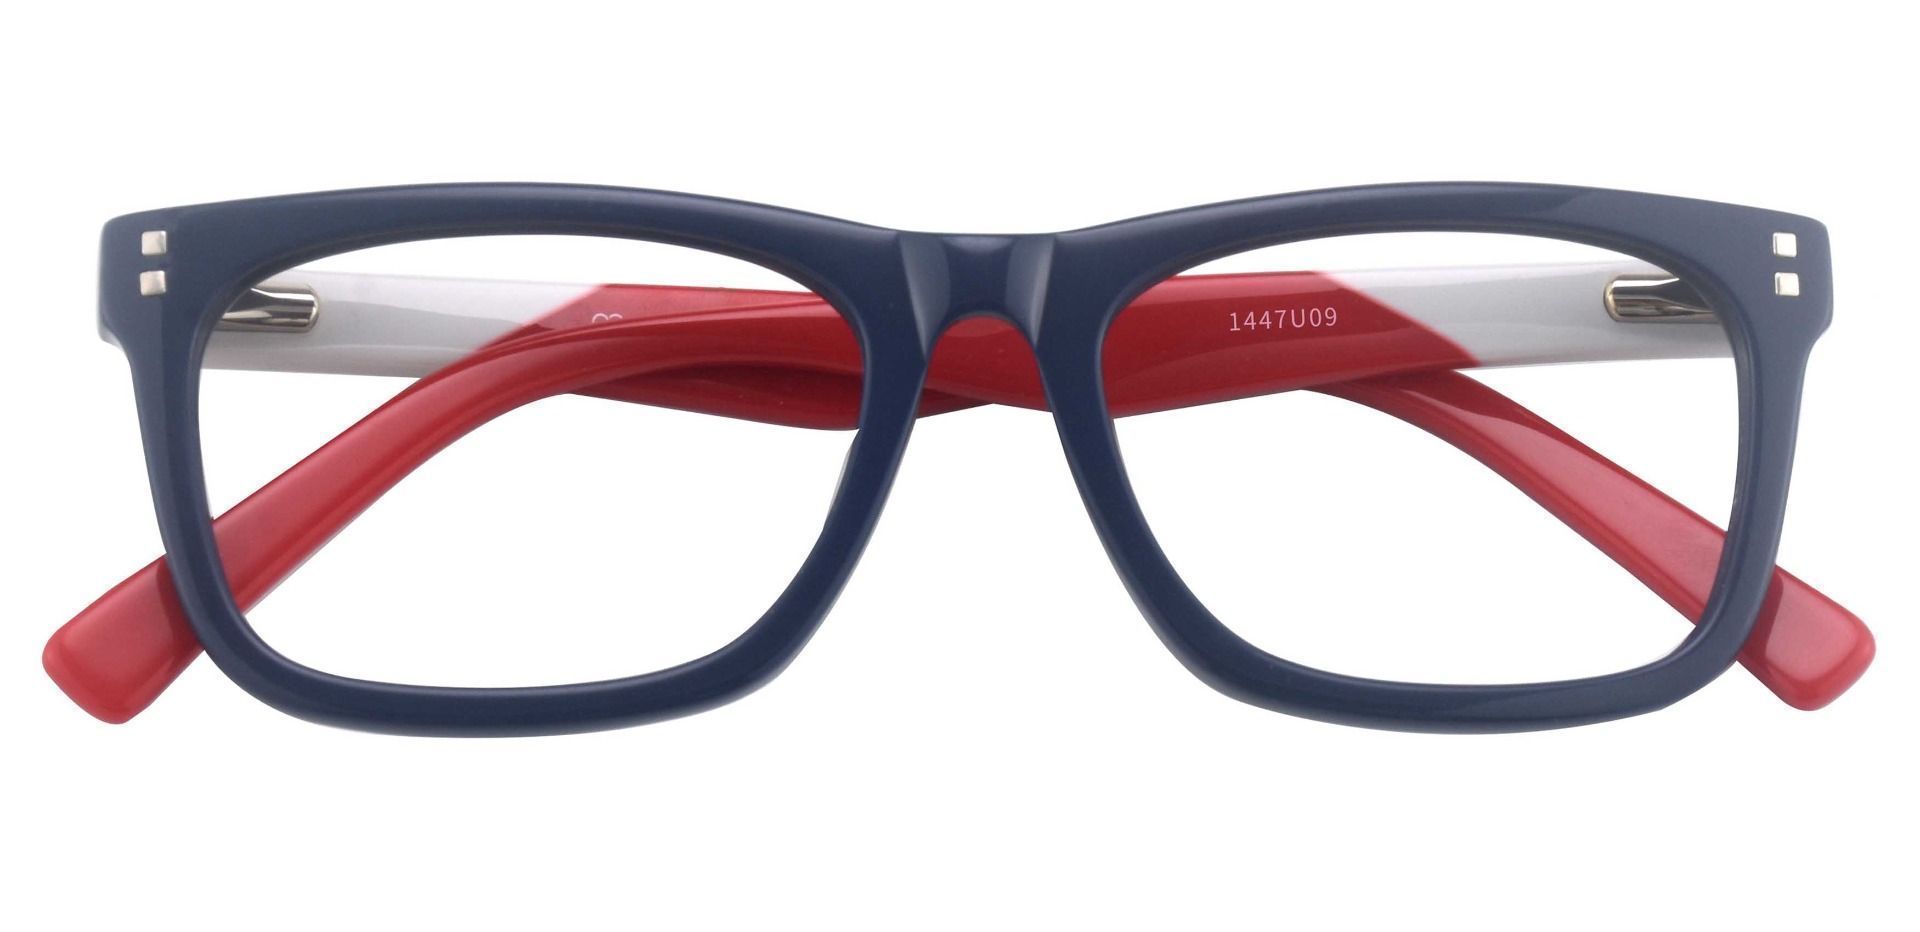 Harbor Rectangle Lined Bifocal Glasses - The Frame Is Blue And Red